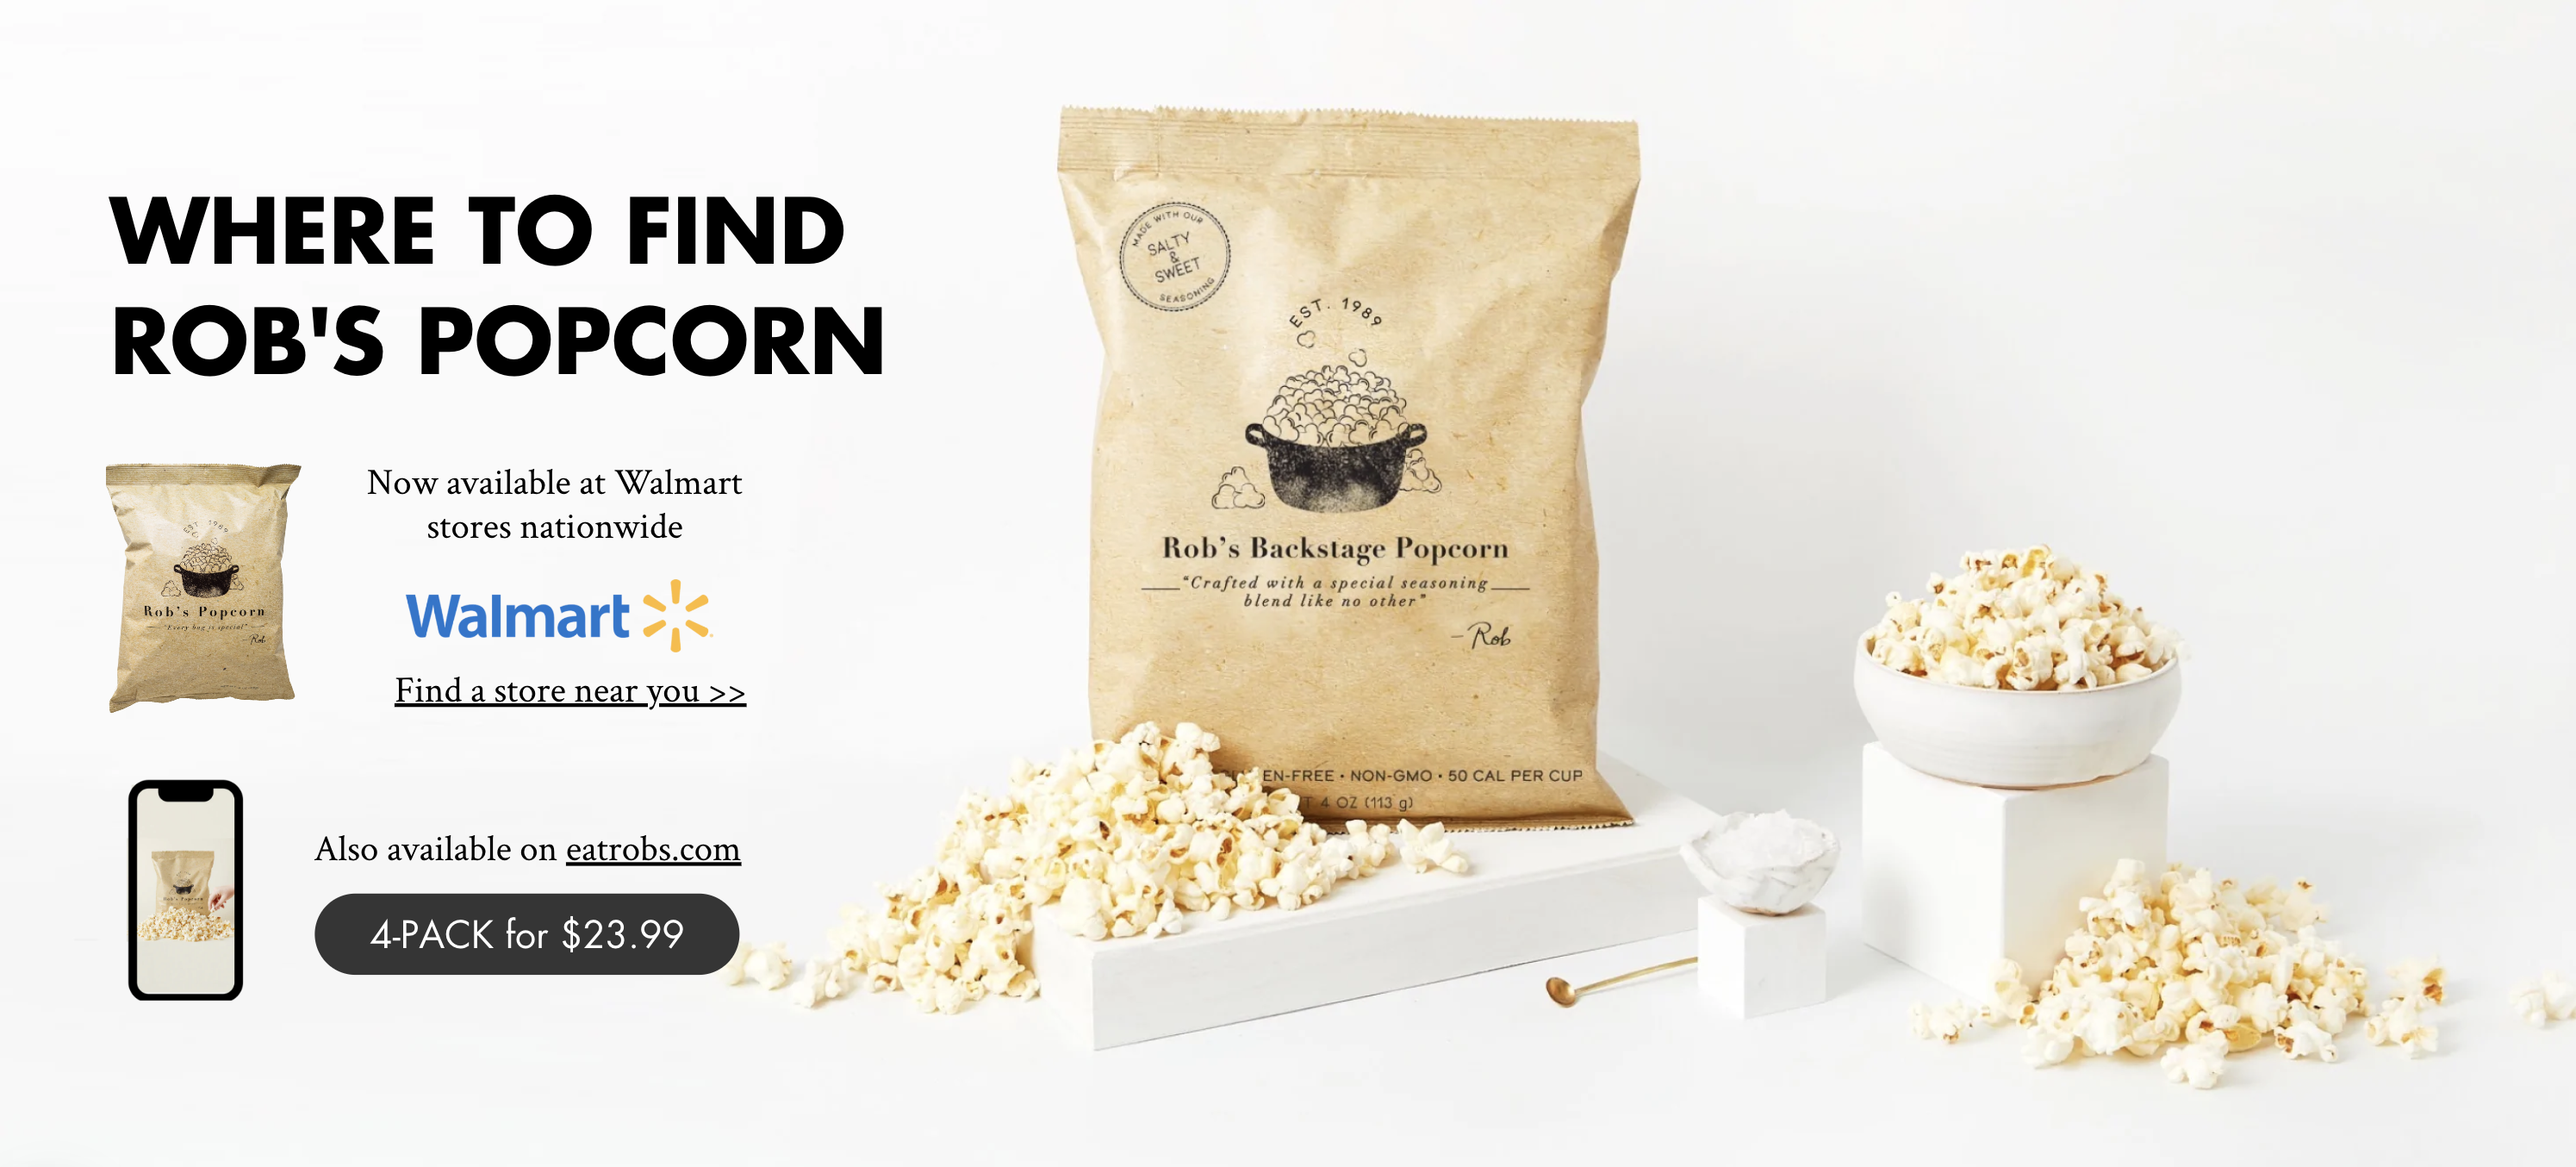 Fans of Rob's Backstage Popcorn can purchase the tasty treat at over 2800+ Walmart locations nationwide